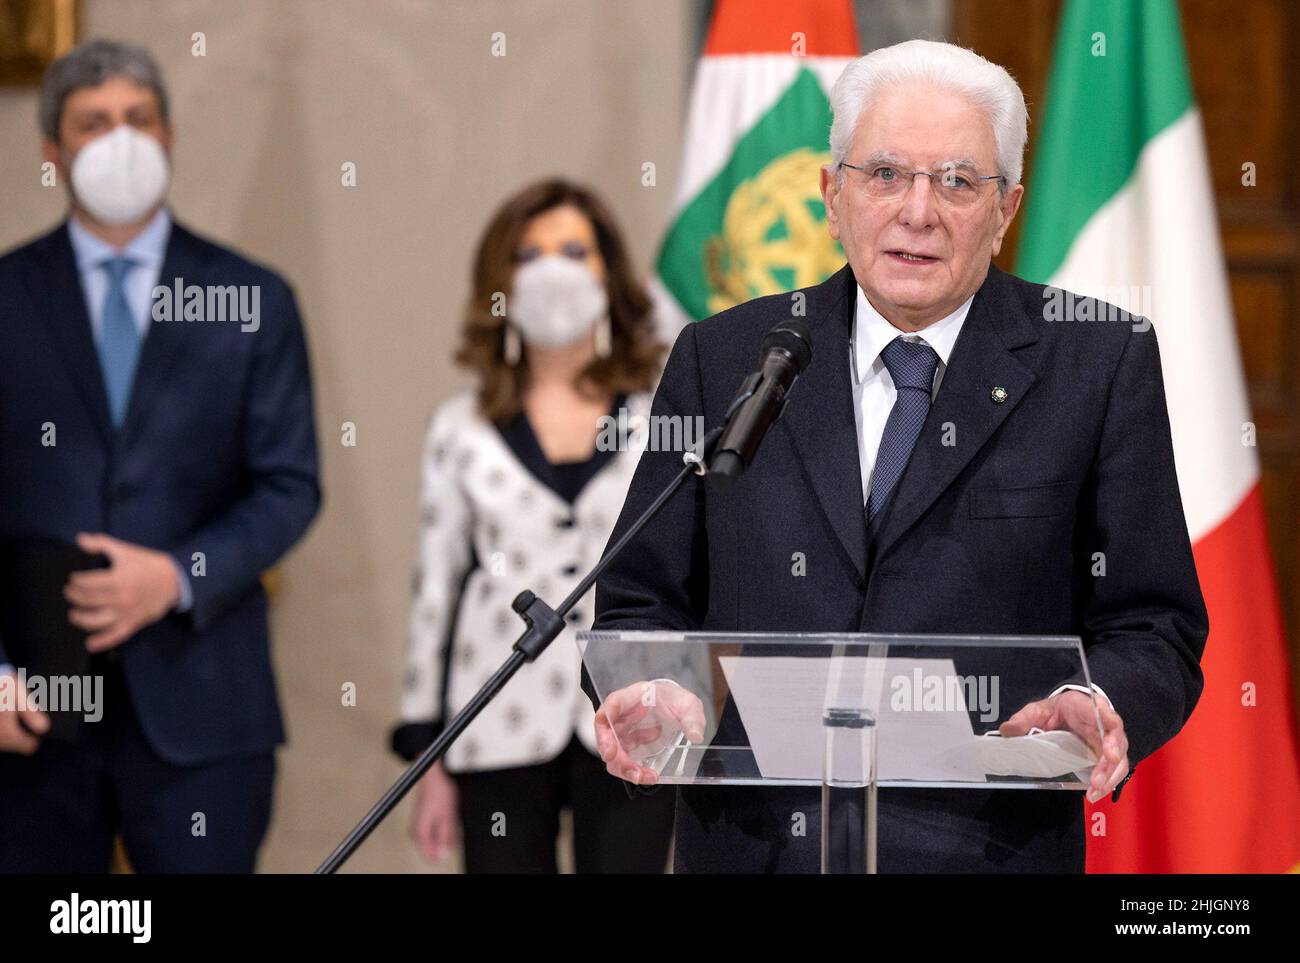 Rome, Italy. 29th Jan, 2022. Italian President Sergio Mattarella (Front) makes a declaration after receiving the official notice of his re-election at the Quirinale presidential palace in Rome, Italy, on Jan. 29, 2022. Italian President Sergio Mattarella was elected to a second term, Lower House Speaker Roberto Fico announced late Saturday, after the parliament gathered in a joint session and concluded its eighth round of voting. Credit: Str/Xinhua/Alamy Live News Stock Photo